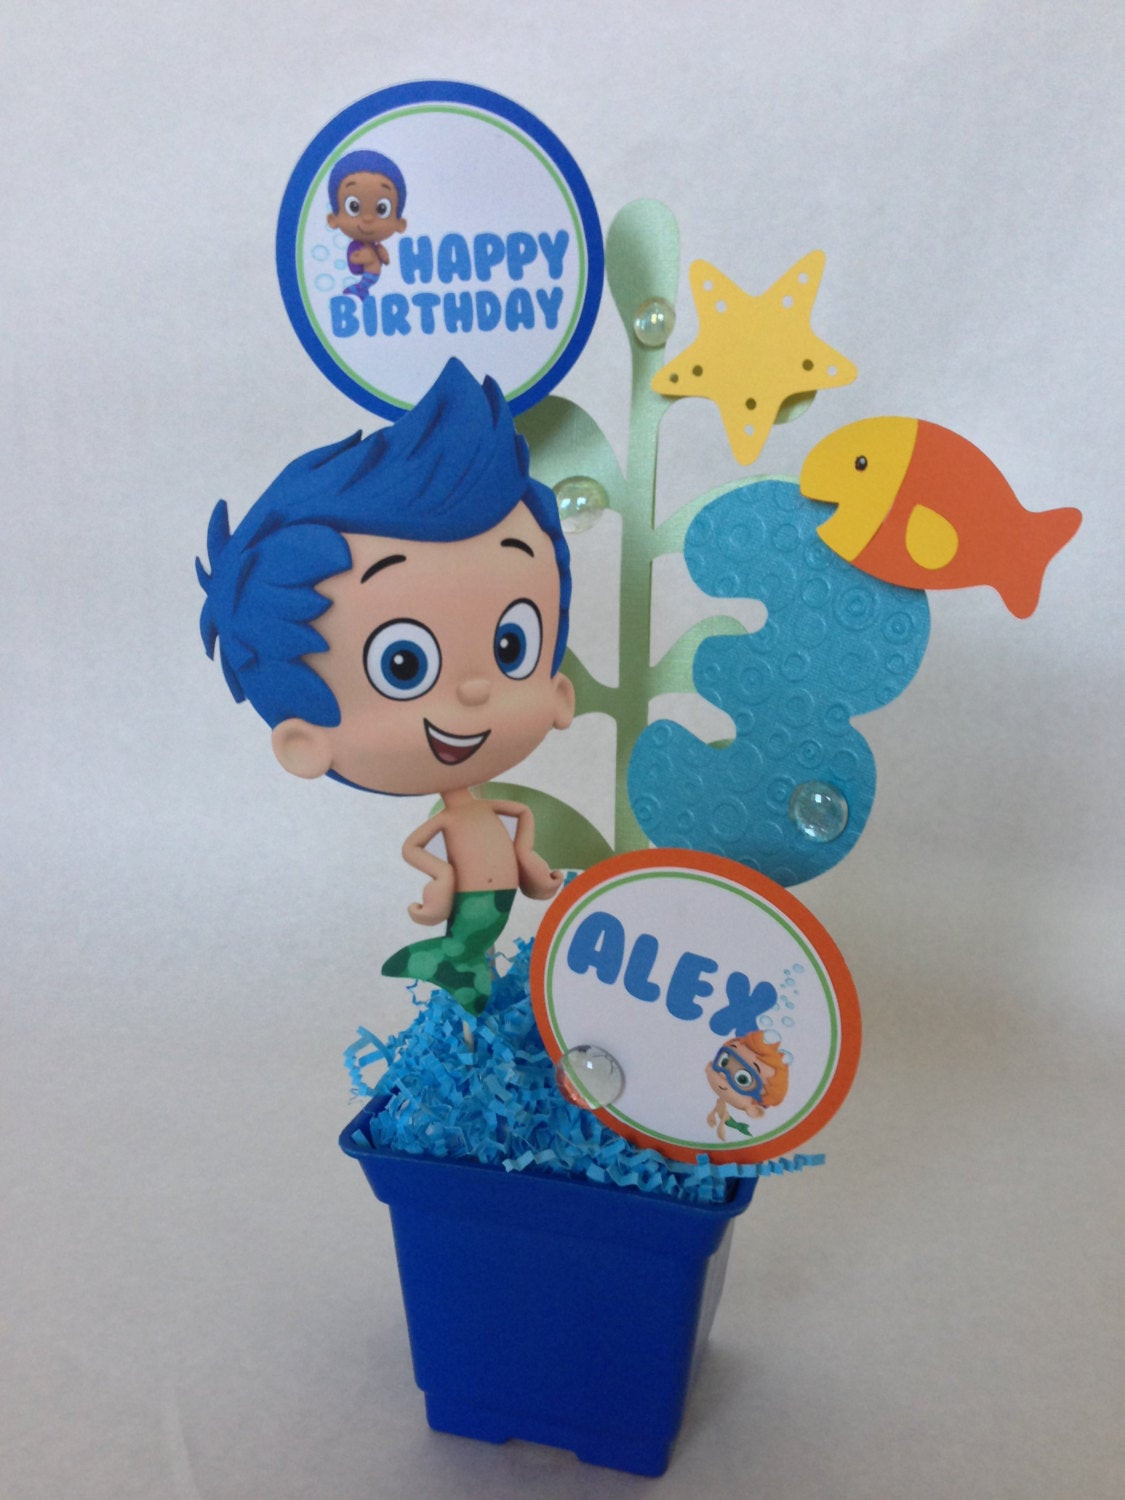 Bubble Guppies Birthday Party Decorations
 Bubble Guppies Birthday Party Centerpiece Decoration